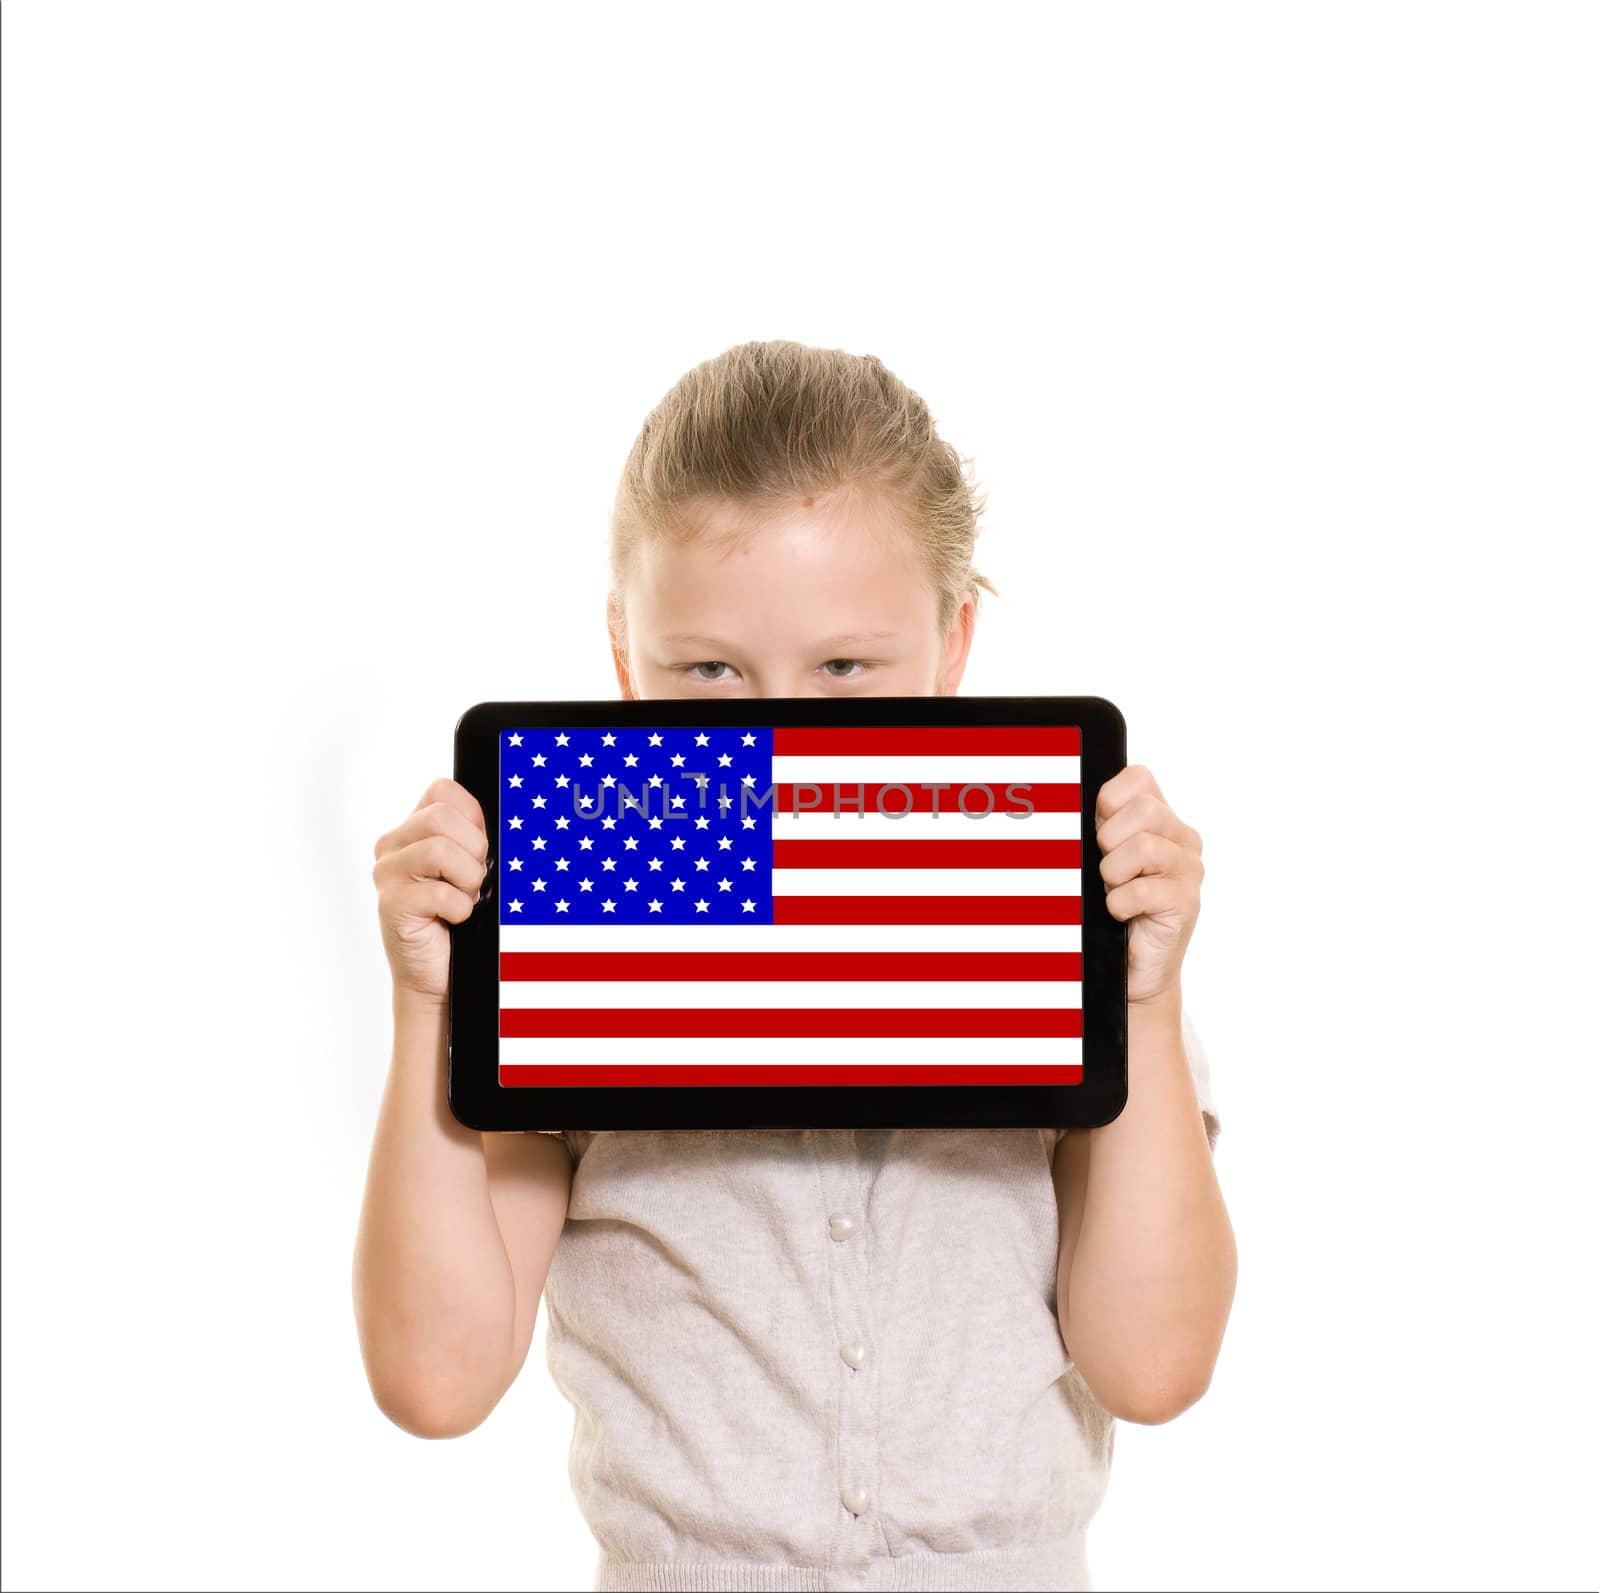 flag of USA displayed on a tablet computer held by young girl